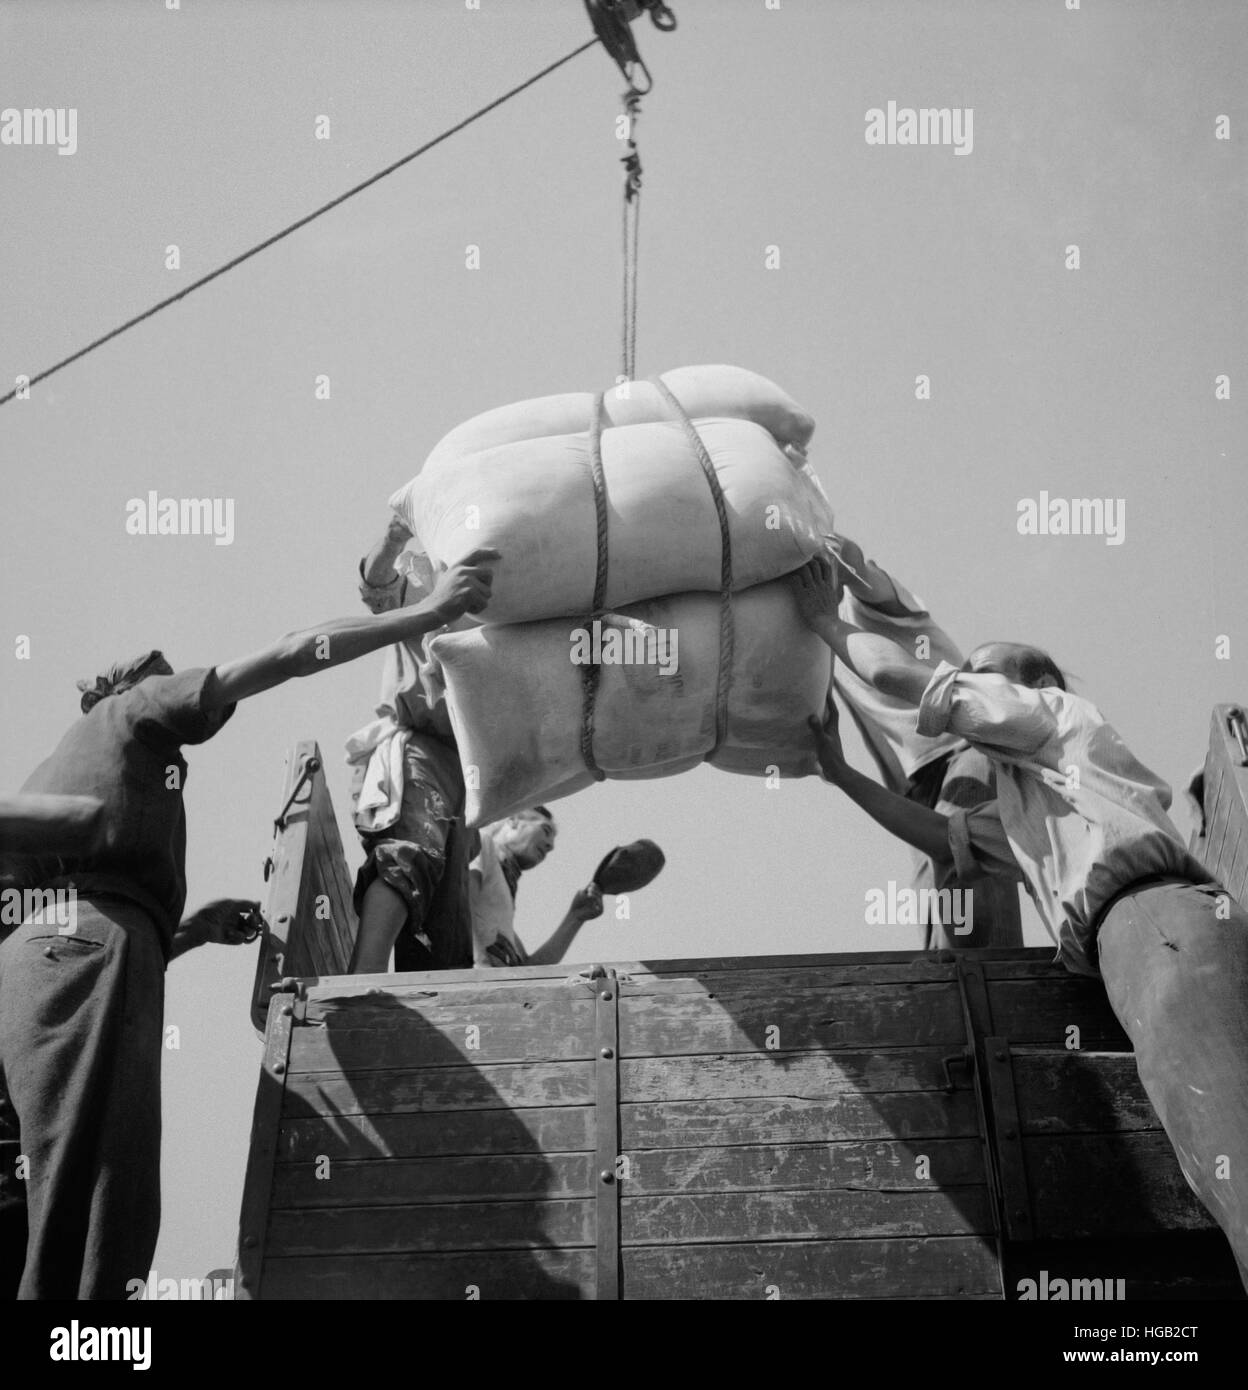 American white flour is loaded onto trucks to be delivered to people in Messina, Sicily, 1943. Stock Photo